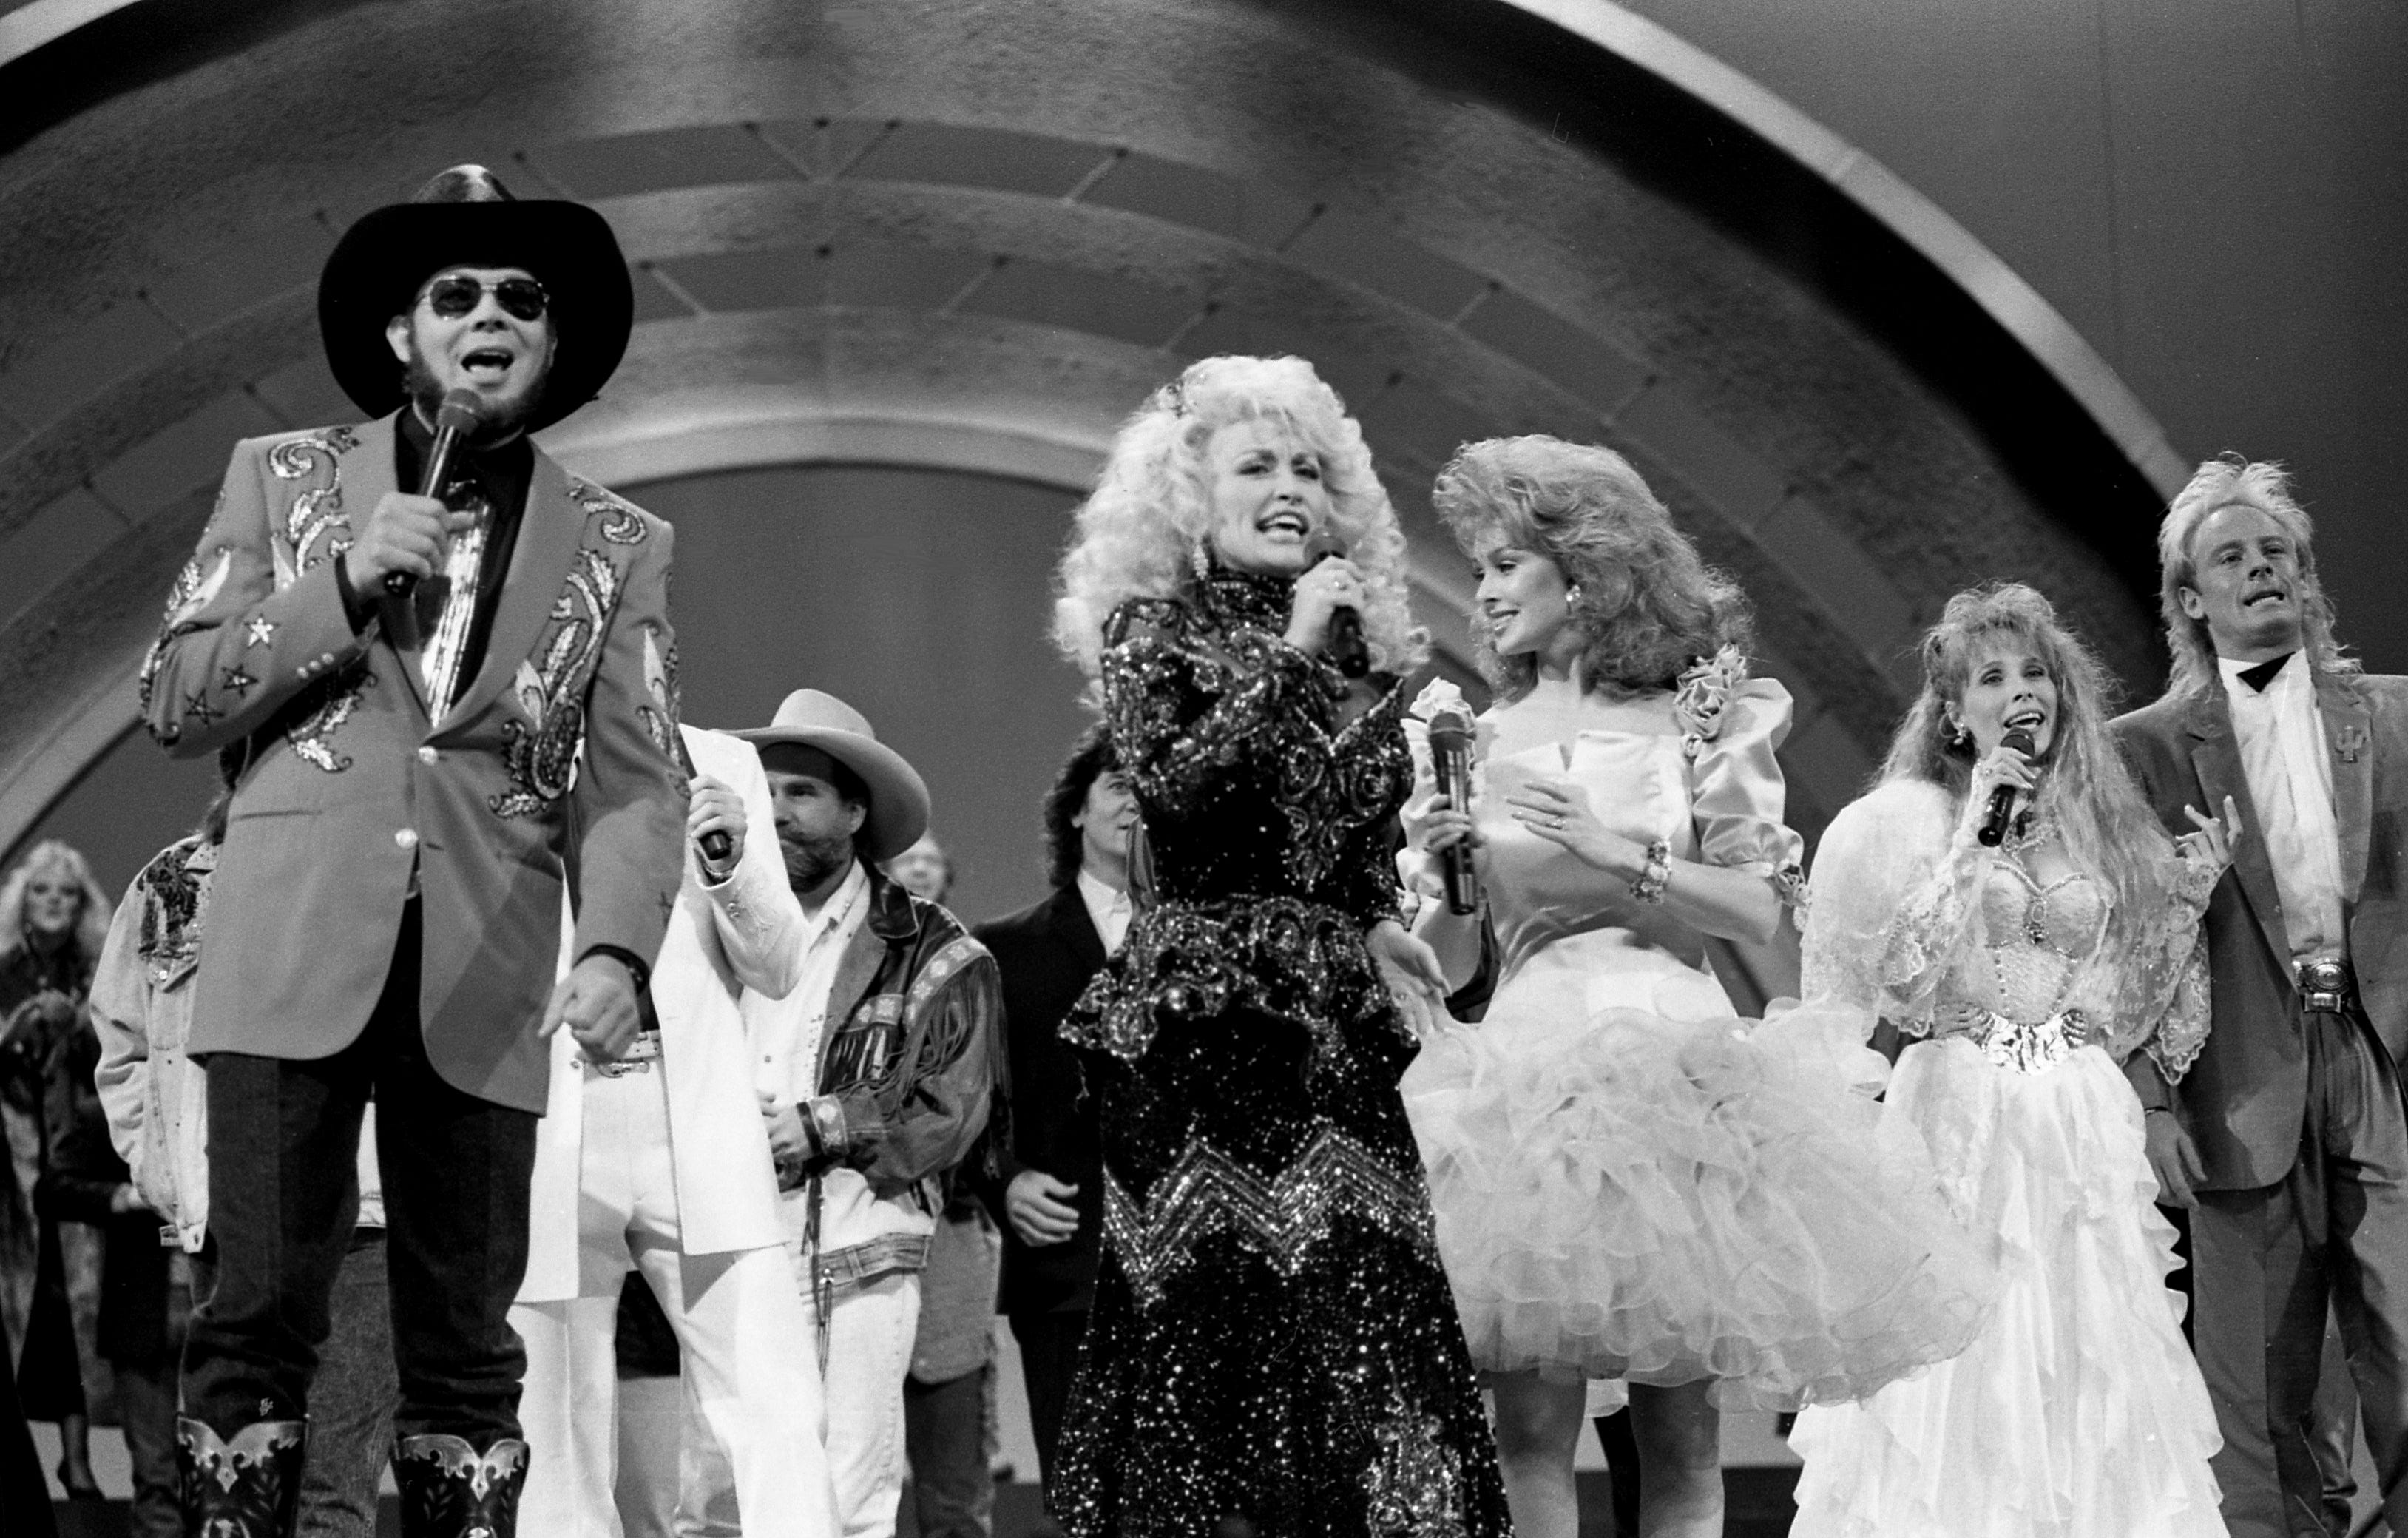 Host Dolly Parton, center, has the other stars, including Hank Williams Jr., left, join her during her hand-clapping country anthem to starts the 22nd annual CMA Awards show at the Grand Ole Opry House Oct. 10, 1988.